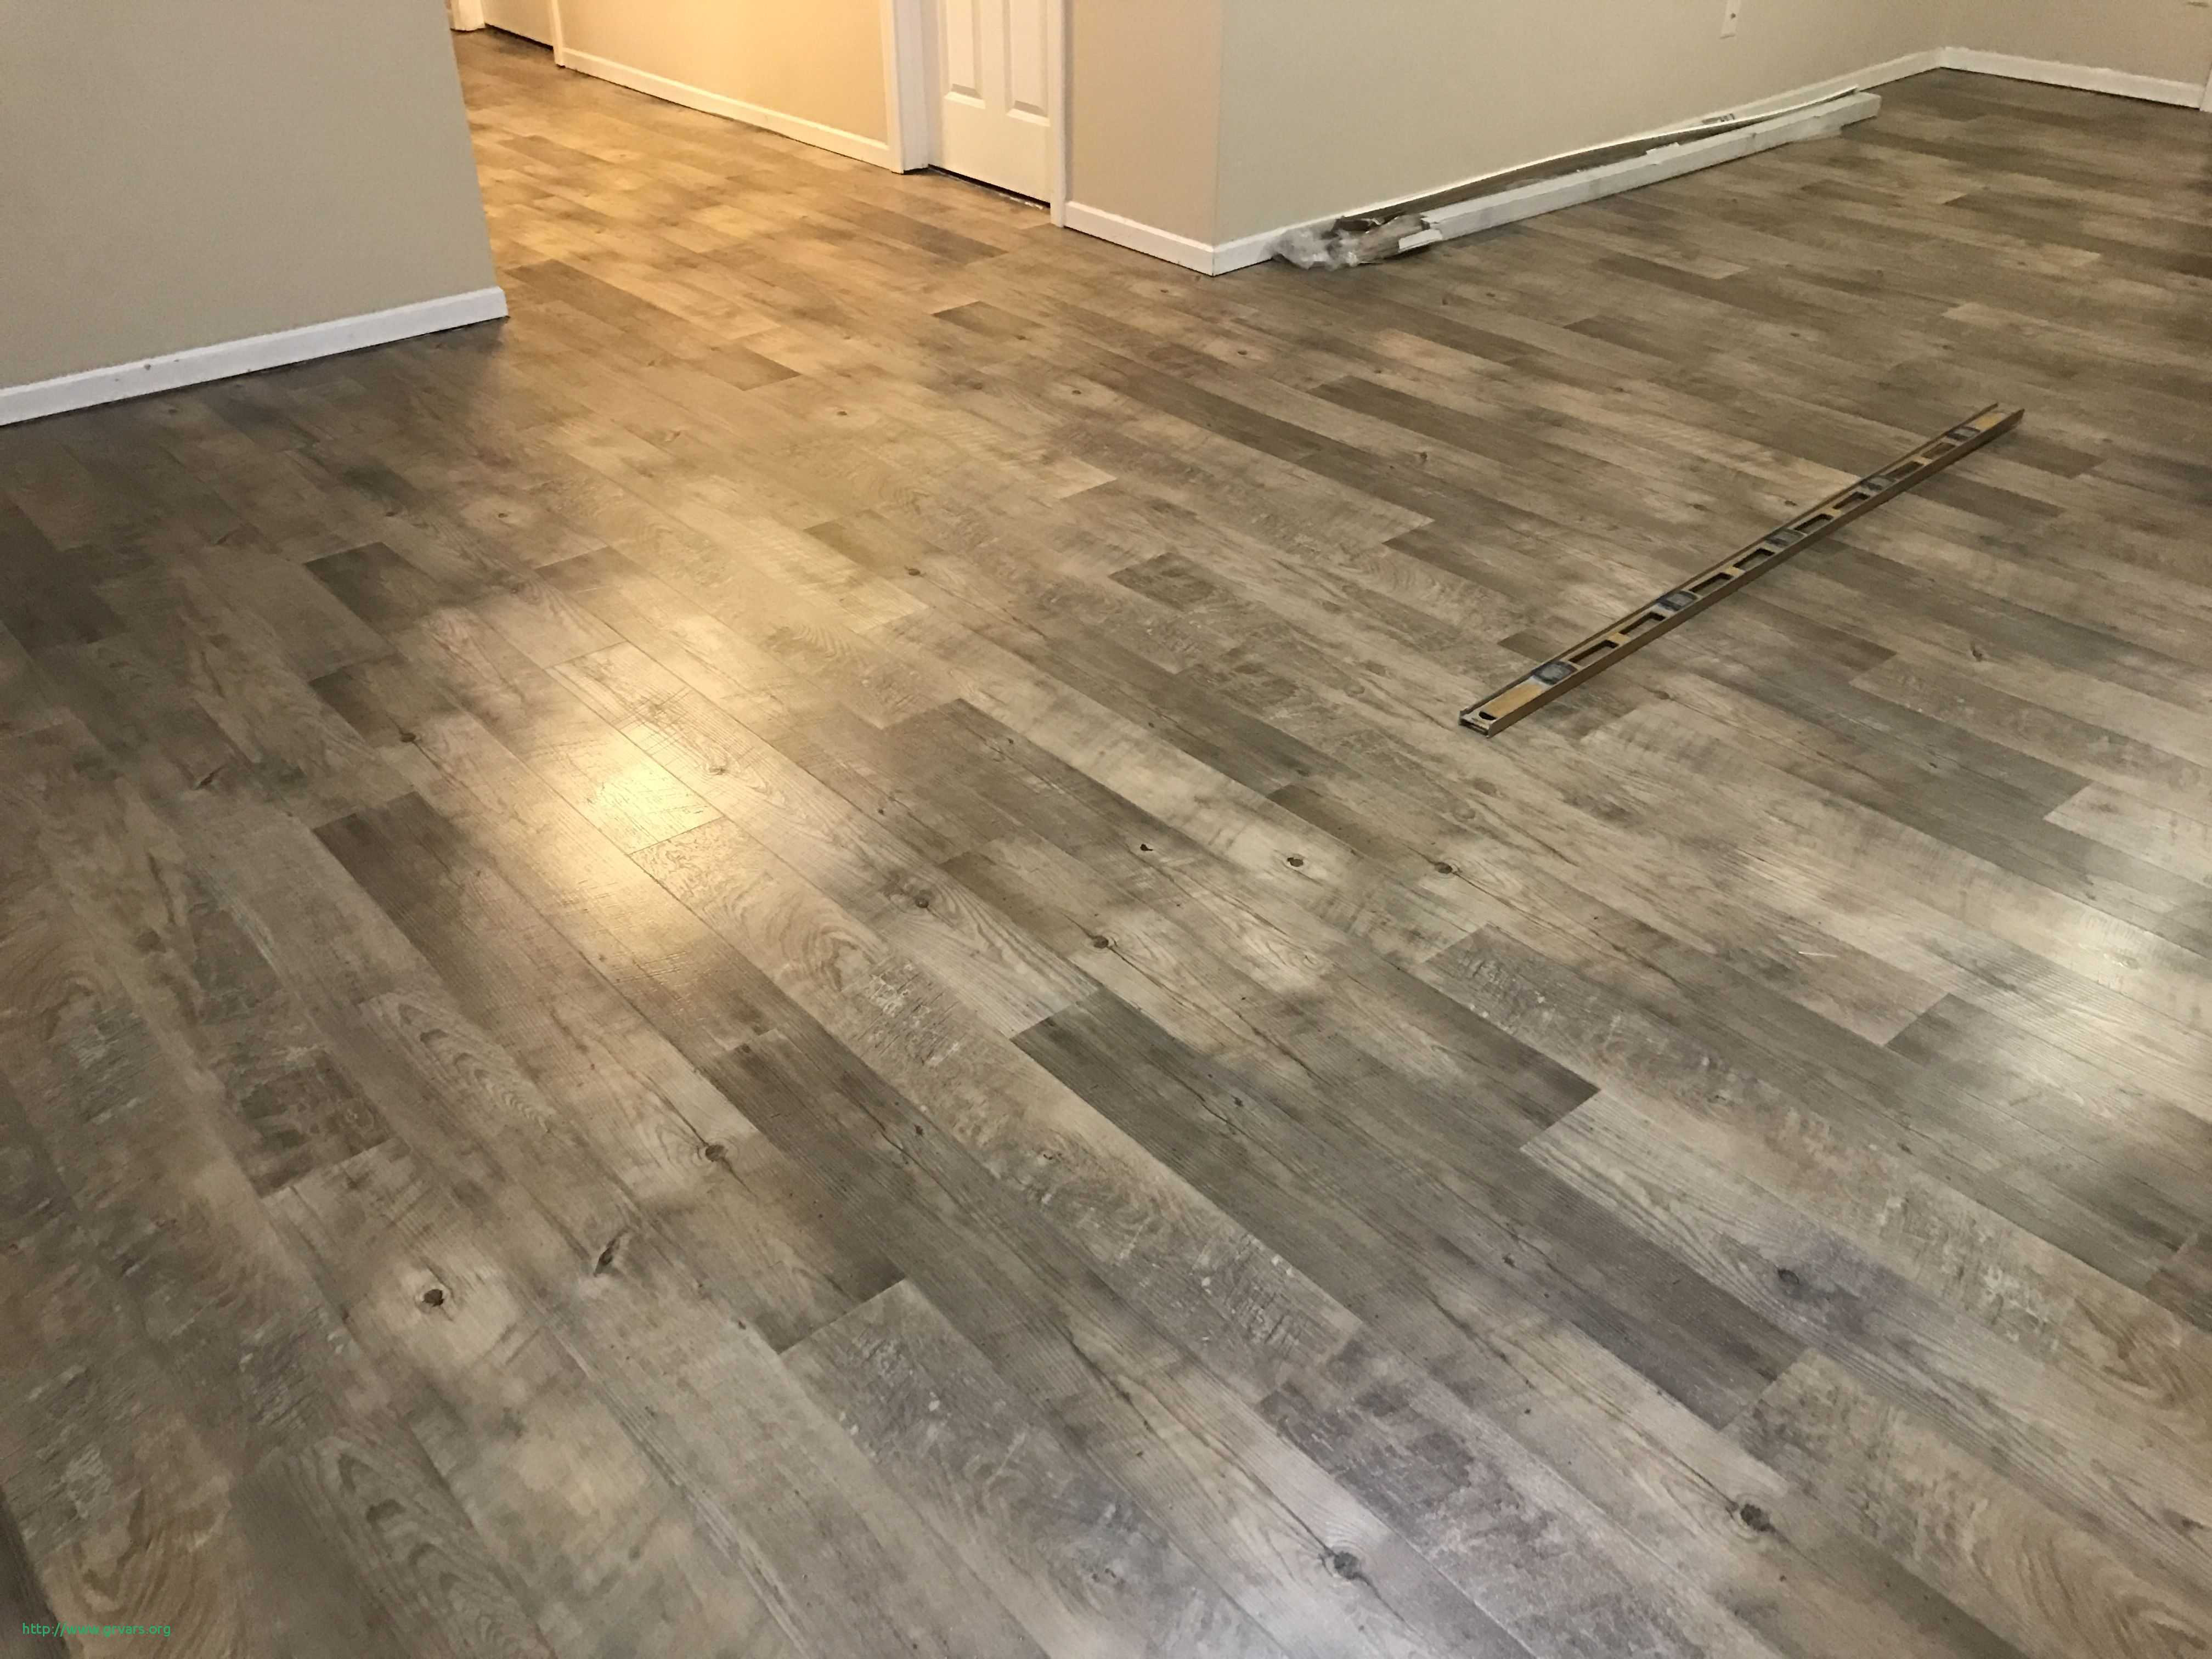 15 Fantastic Average Cost Of Prefinished Hardwood Flooring Installation 2024 free download average cost of prefinished hardwood flooring installation of how much does it cost to install wood floors how much does it cost with average cost per square foot to install hardwood floors 